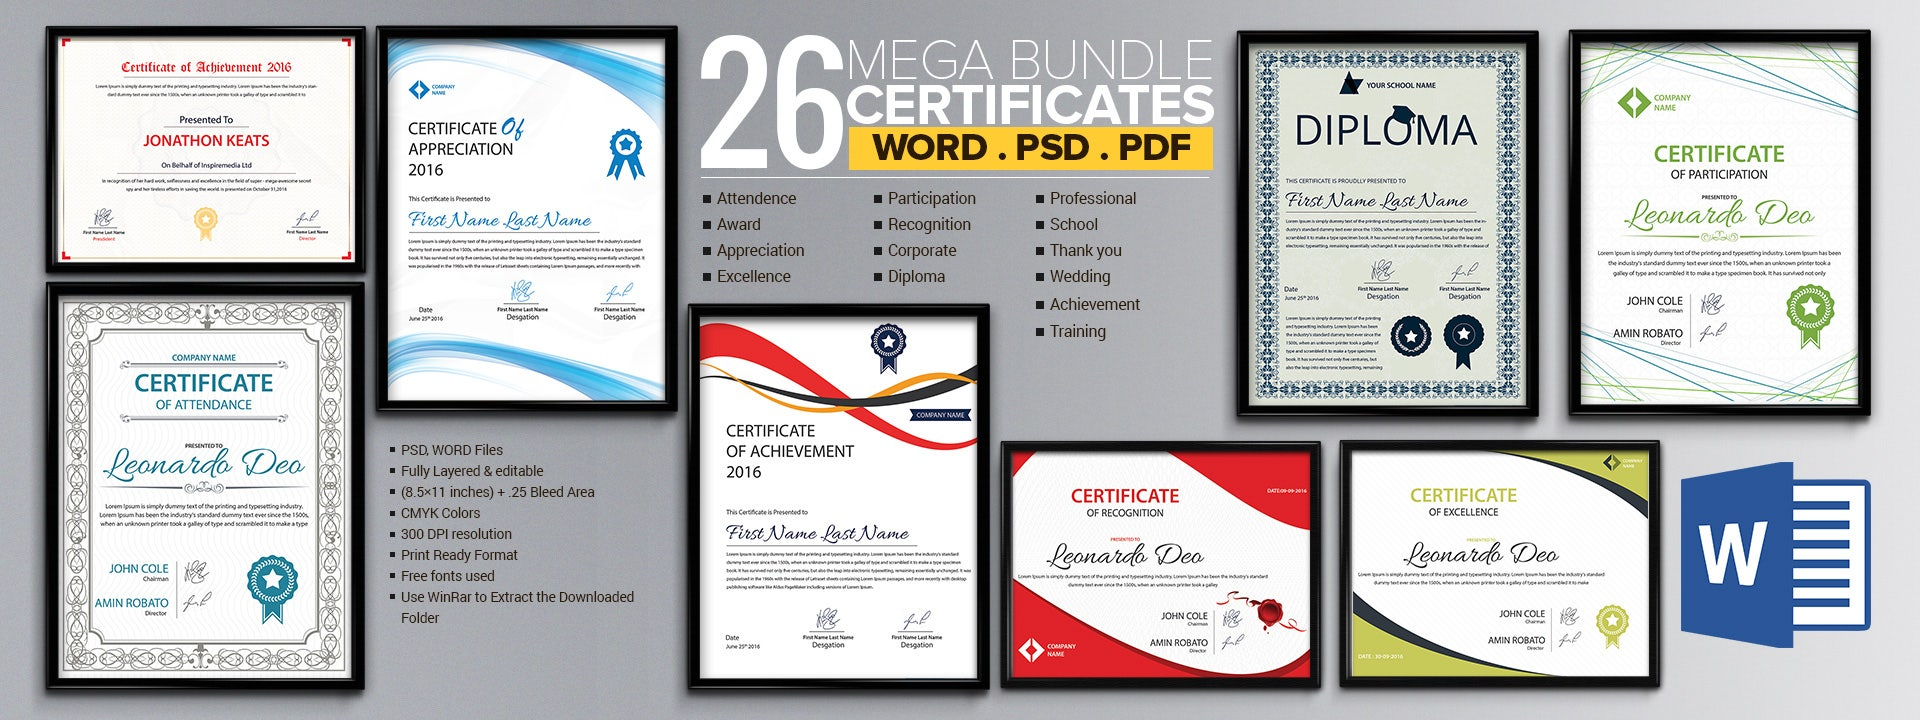 Word Certificate Template - 10+ Free Download Samples, Examples  With Regard To Microsoft Office Certificate Templates Free